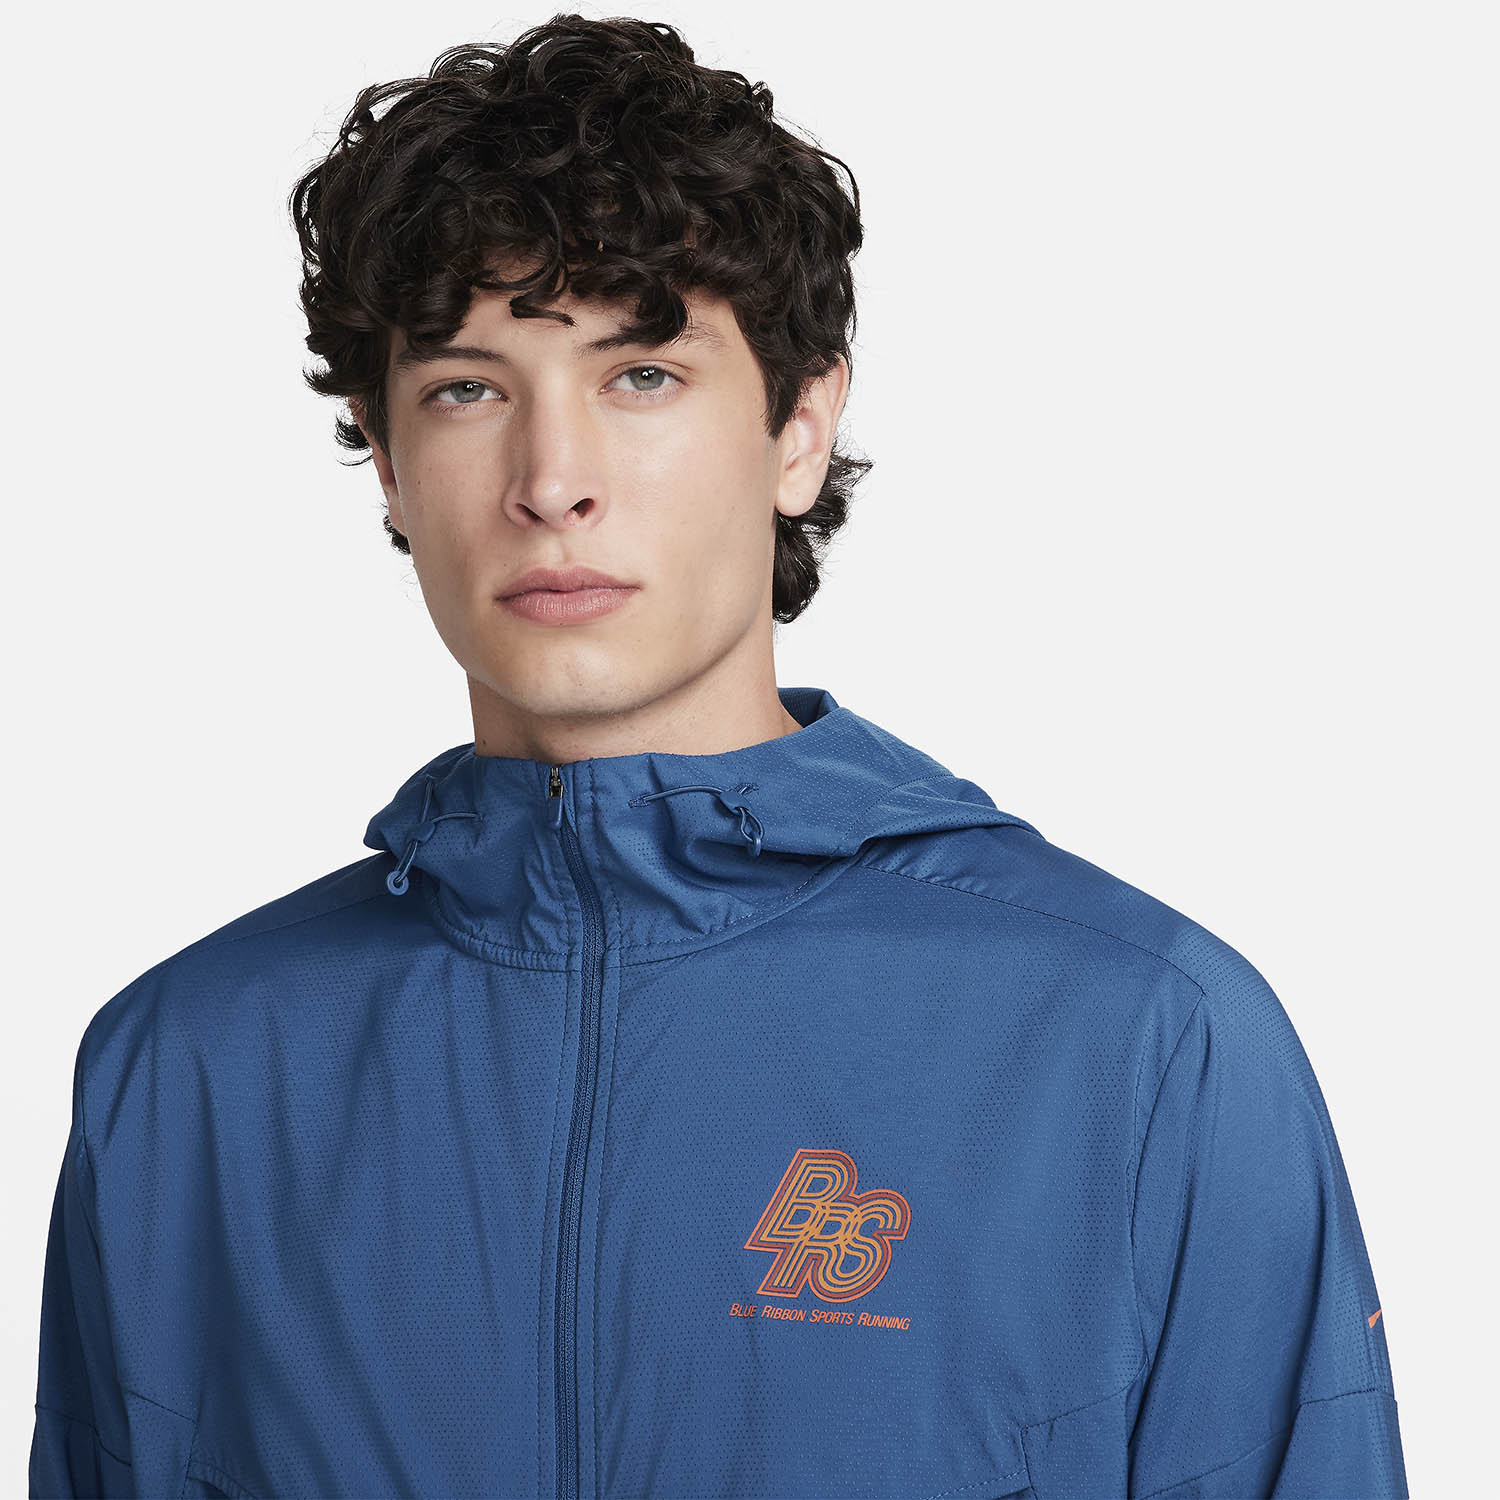 Nike Windrunner Energy Repel BRS Giacca - Court Blue/Safety Orange